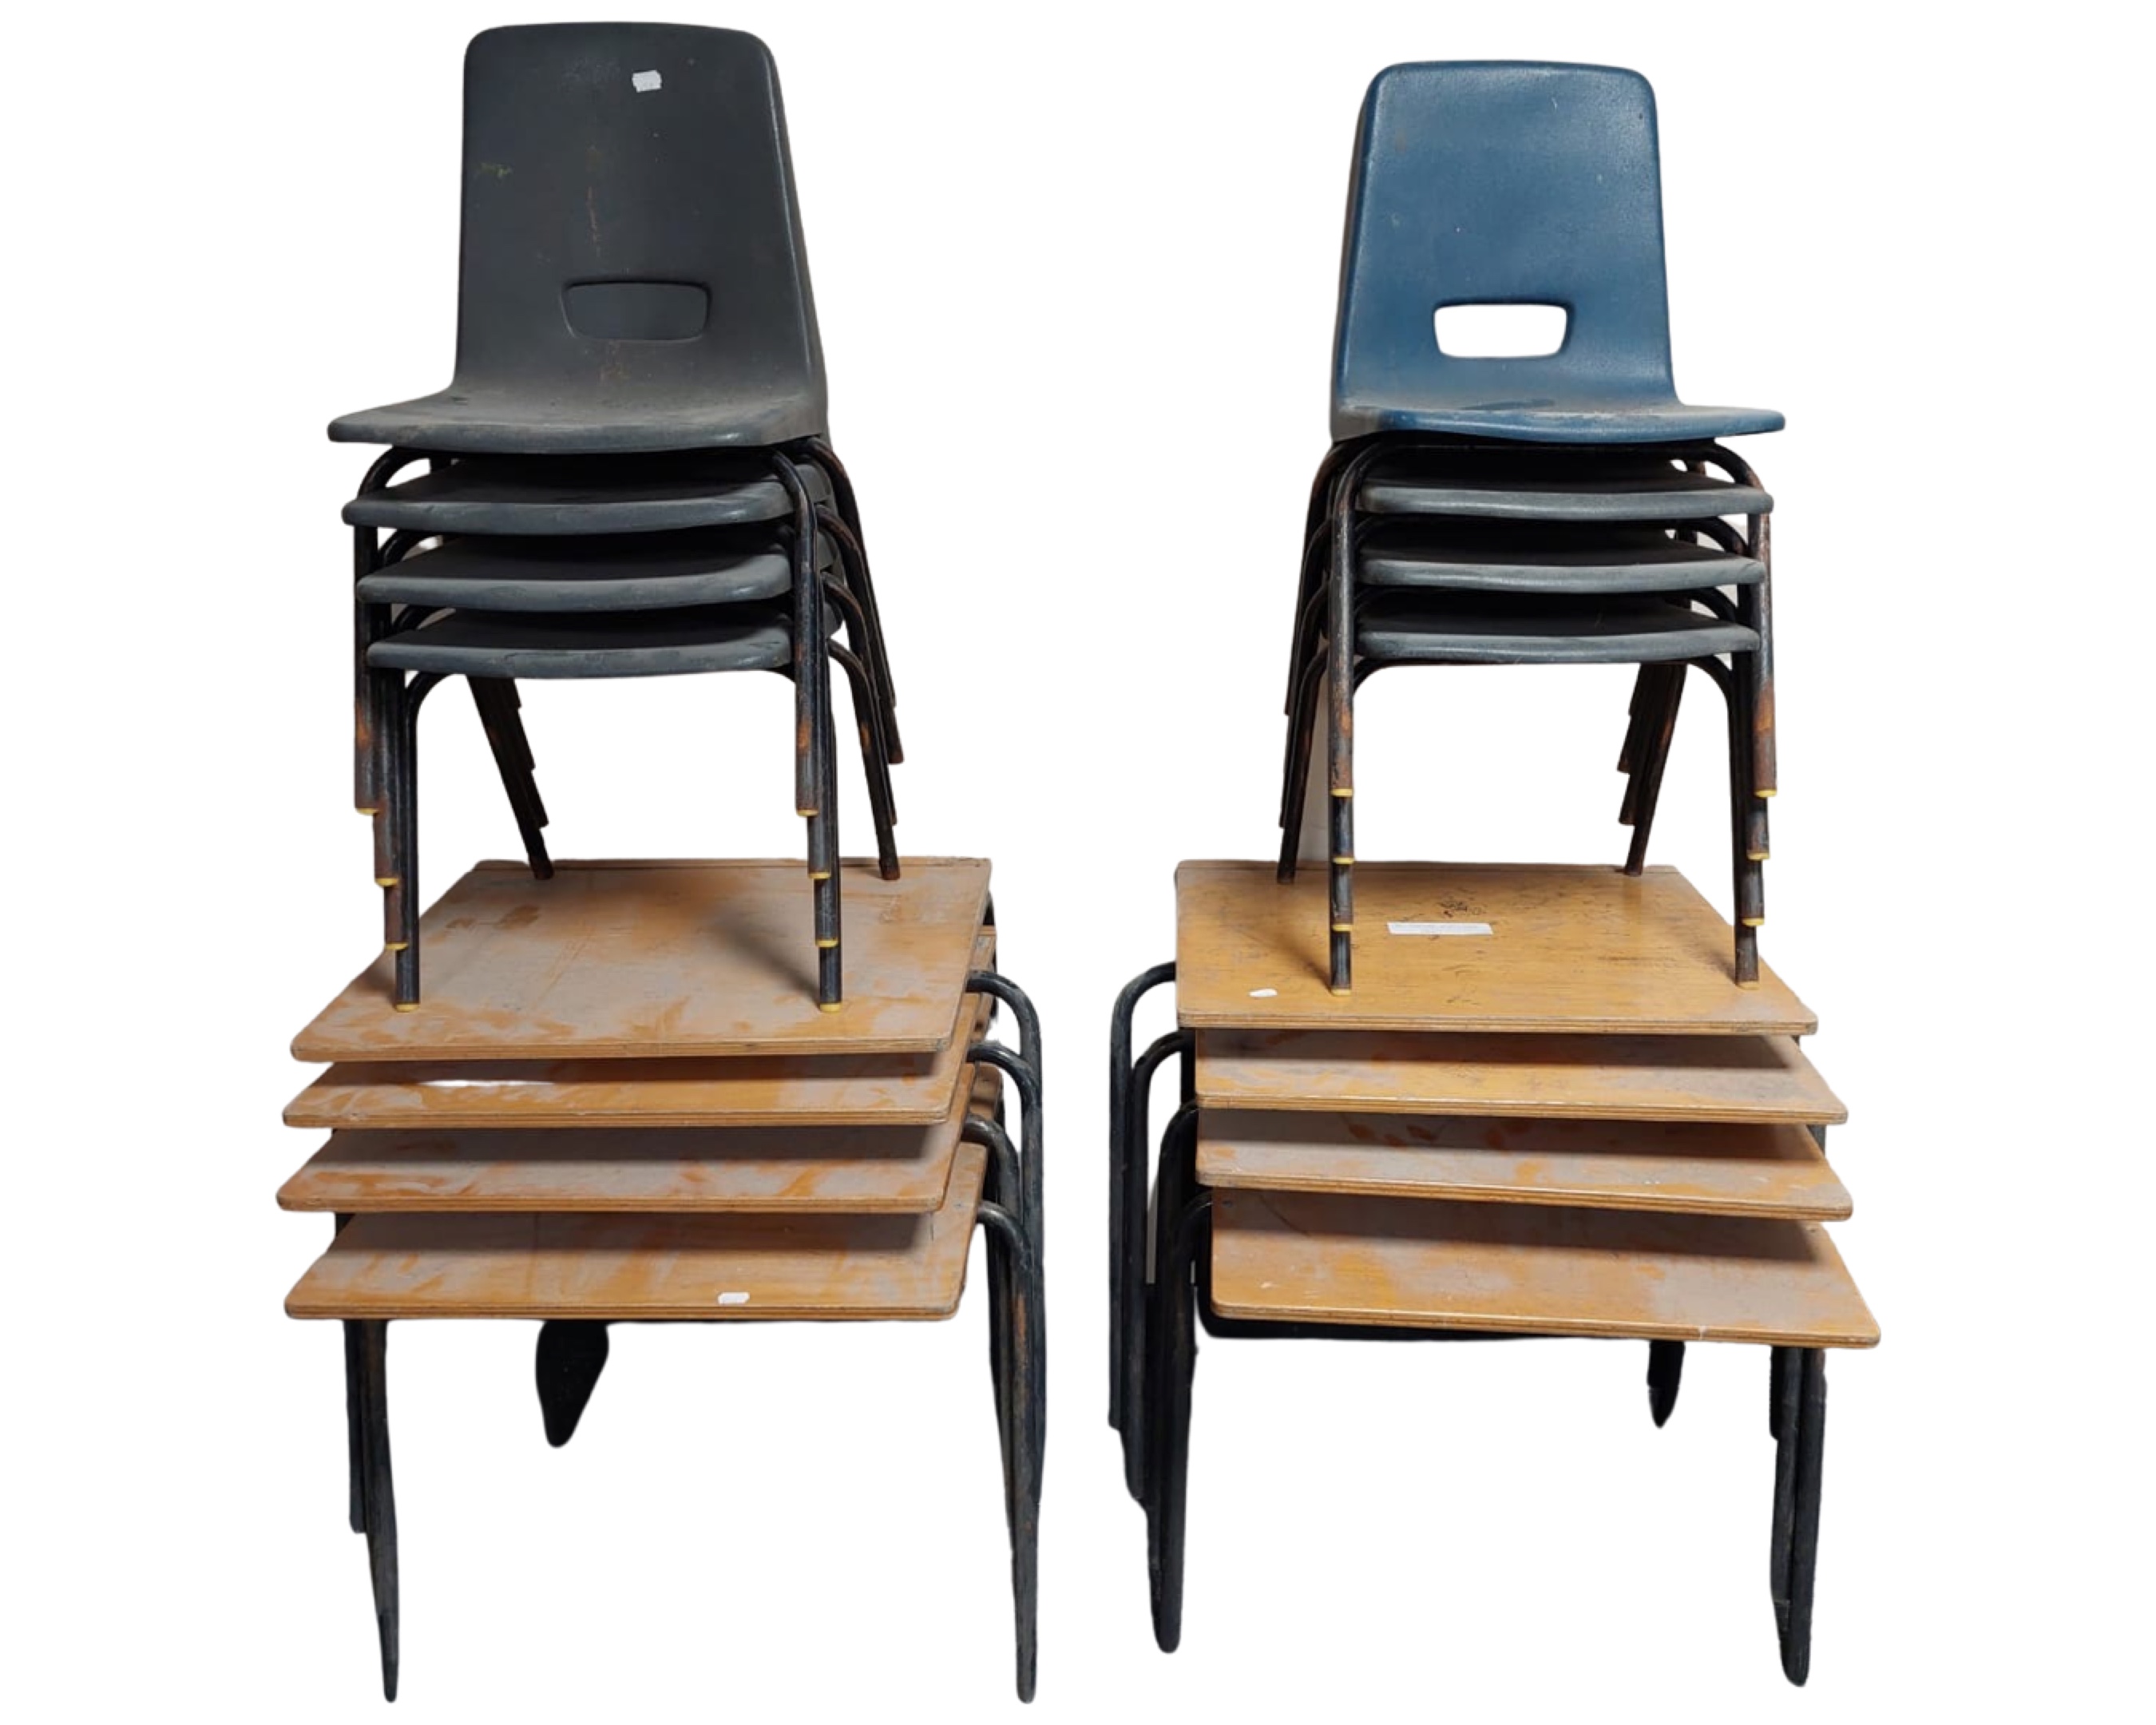 Eight vintage school desks and chairs